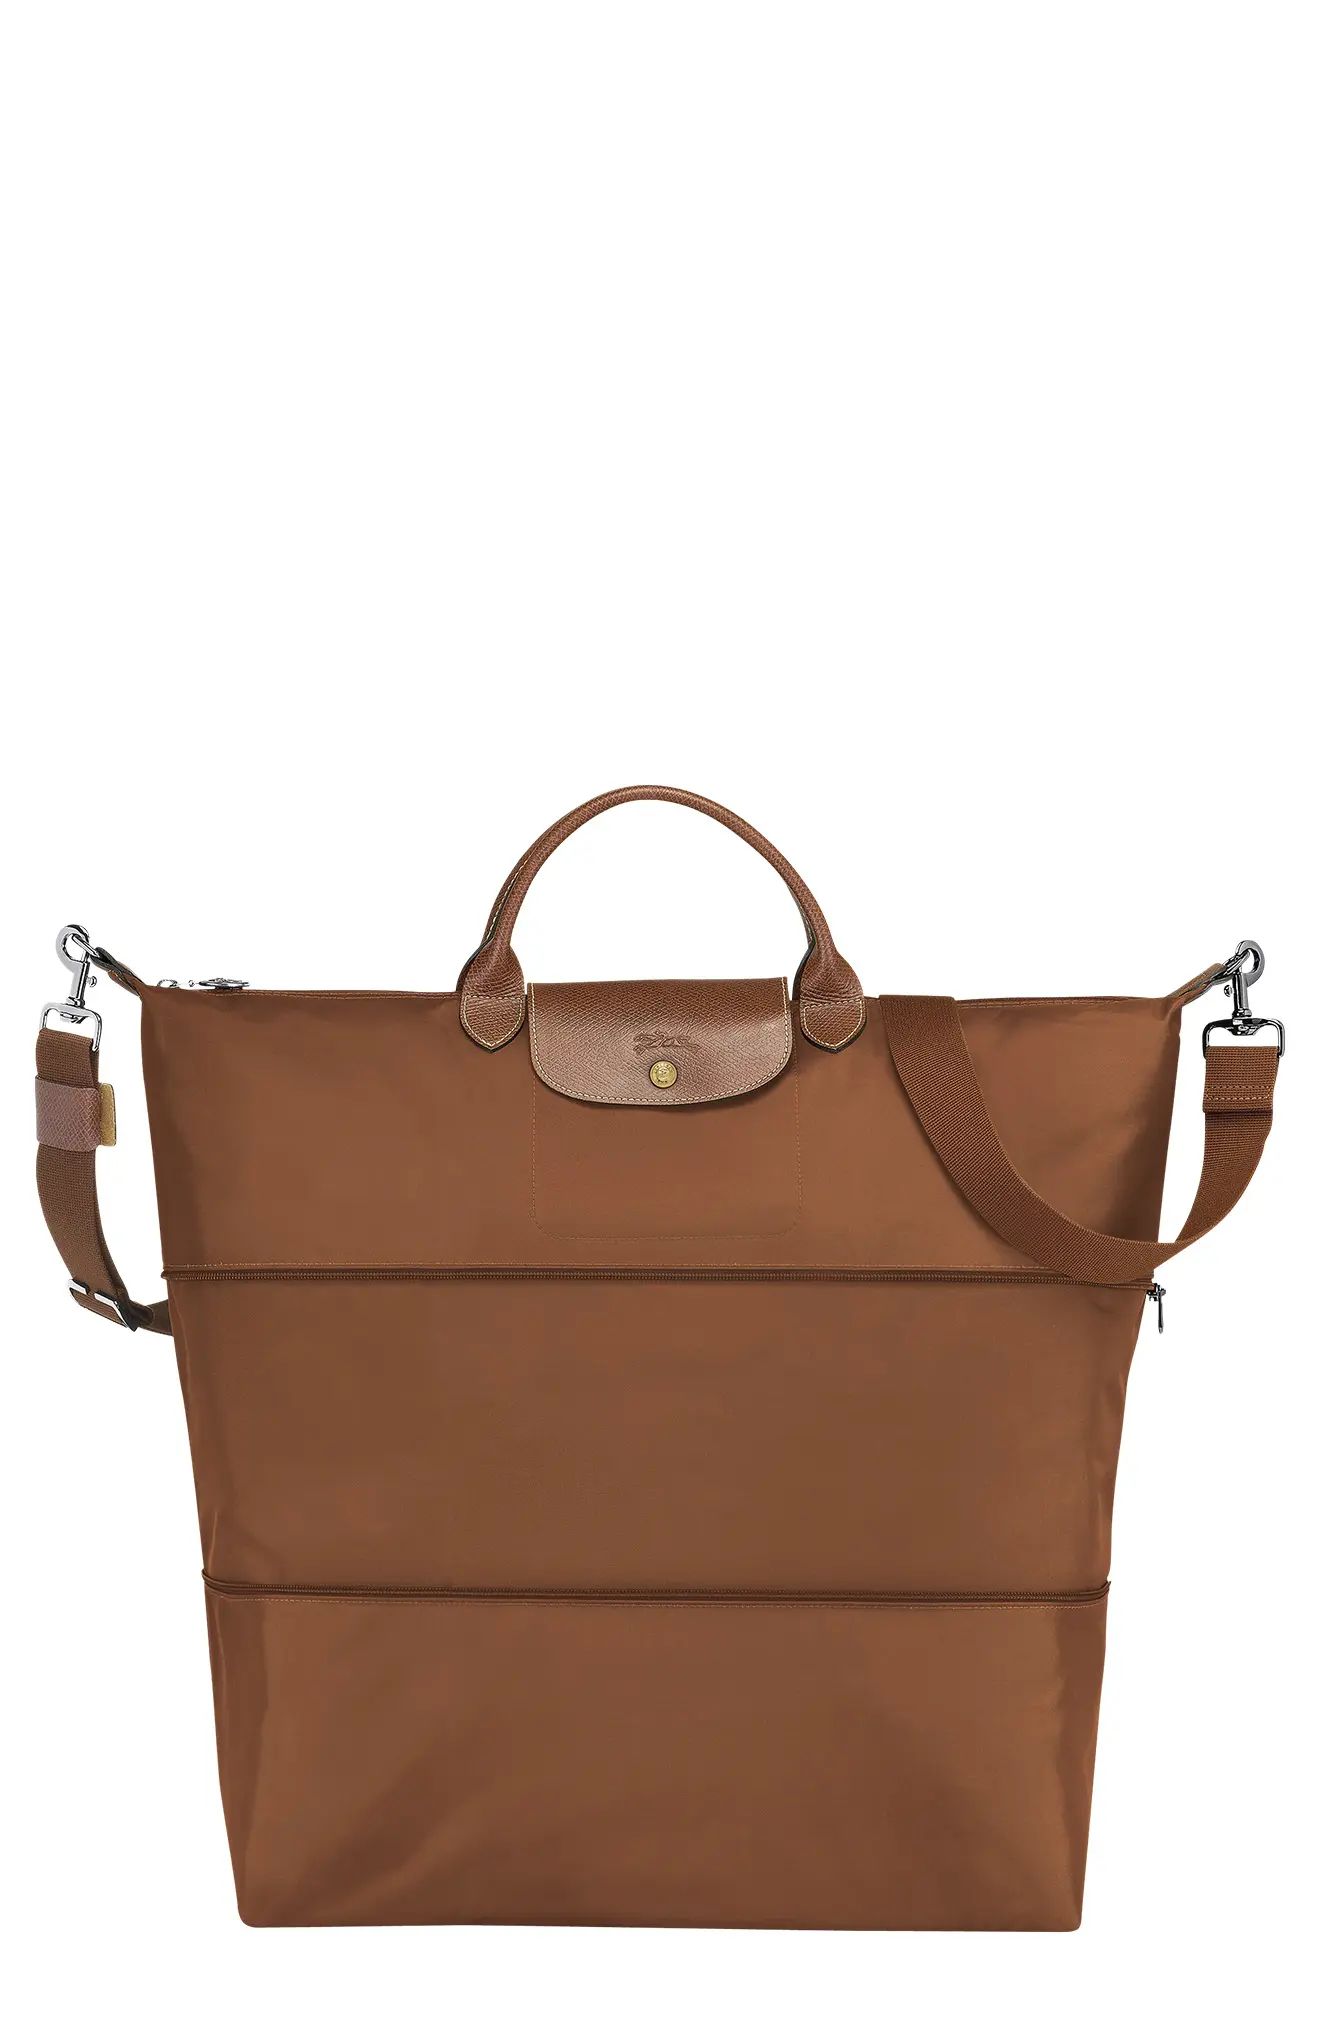 Longchamp Le Pliage 21-Inch Expandable Travel Bag in Cognac at Nordstrom, Size No Size | Nordstrom